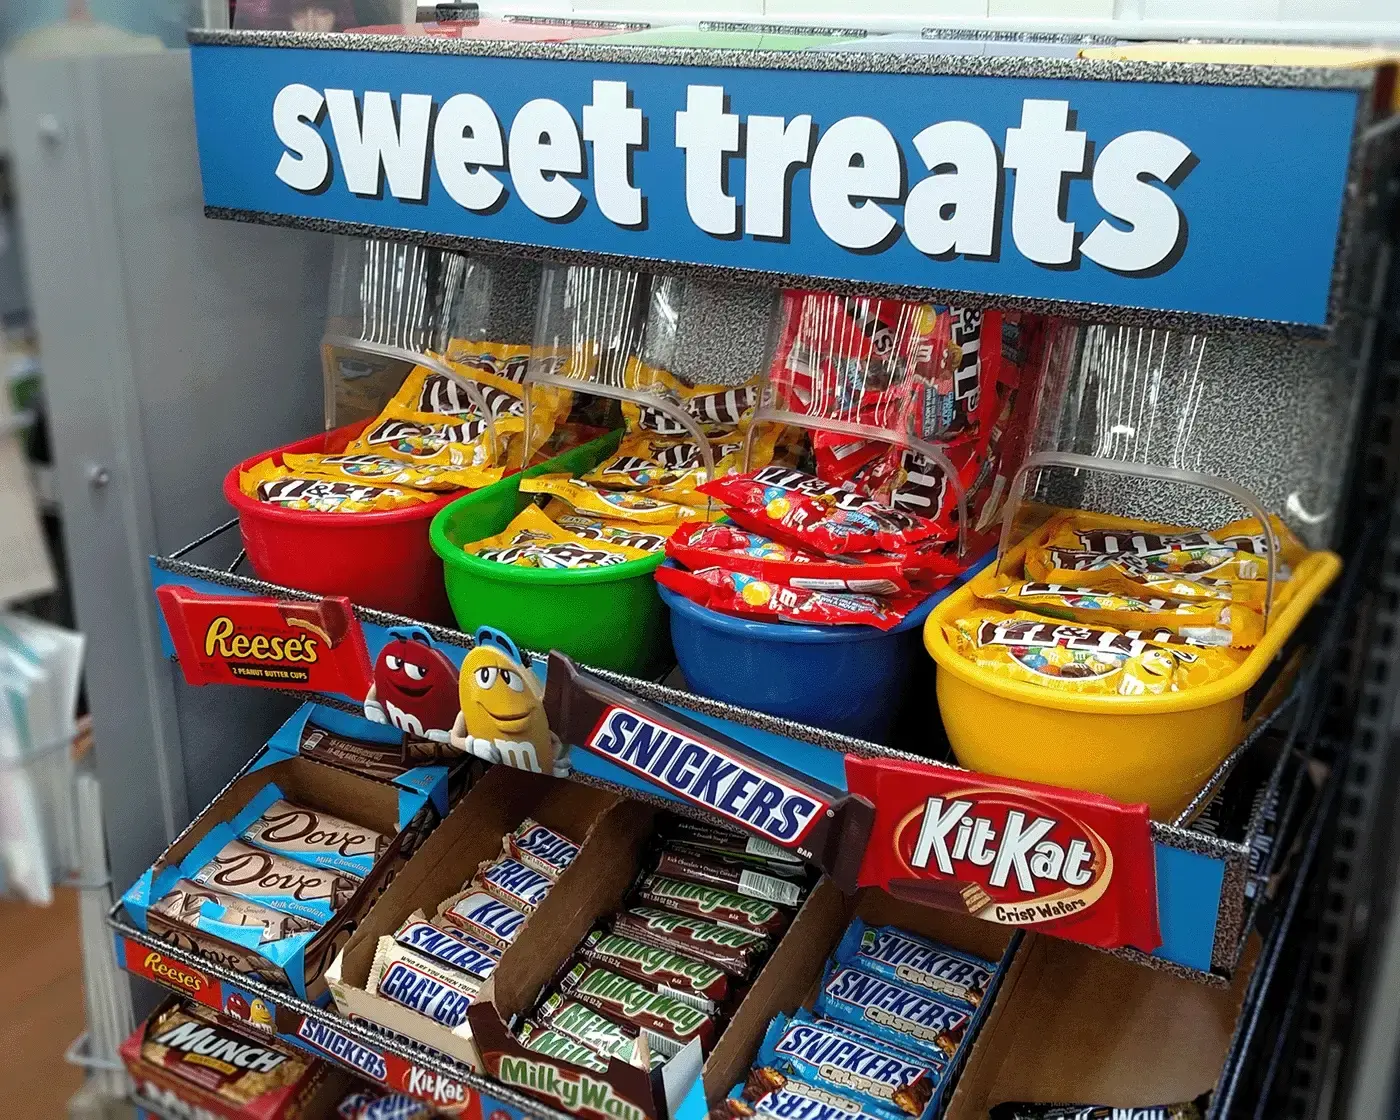 A display of candy